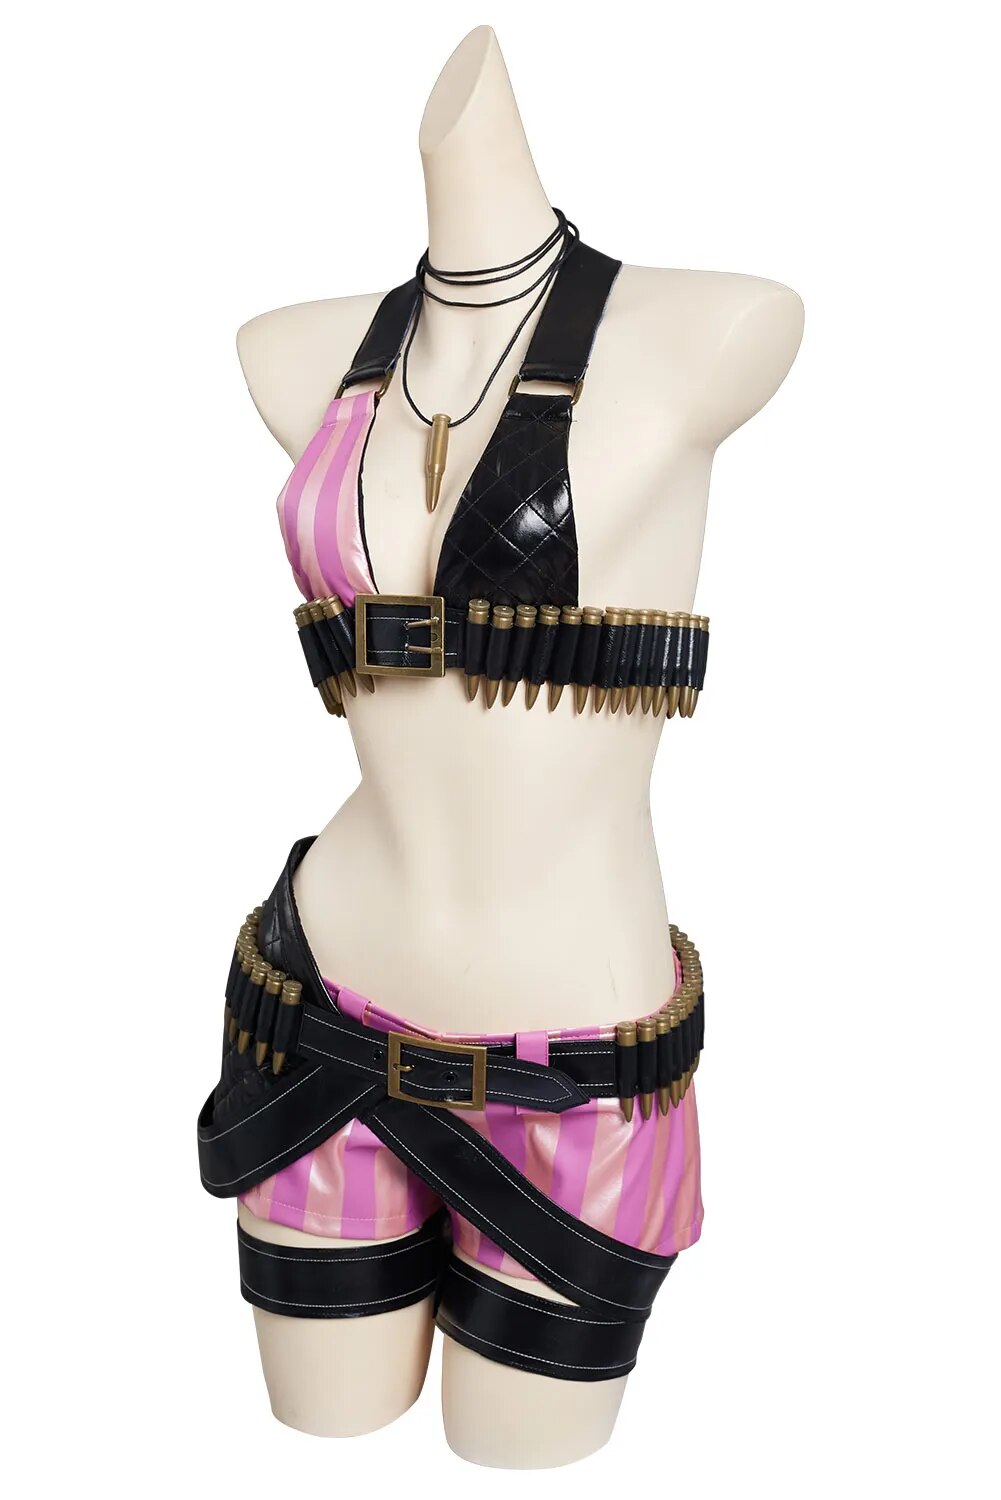 Jinx Cosplay Costume Anime Game  Women Pink Tube Top Stocking Gloves Outfits Halloween Party Role Play Suits For Female